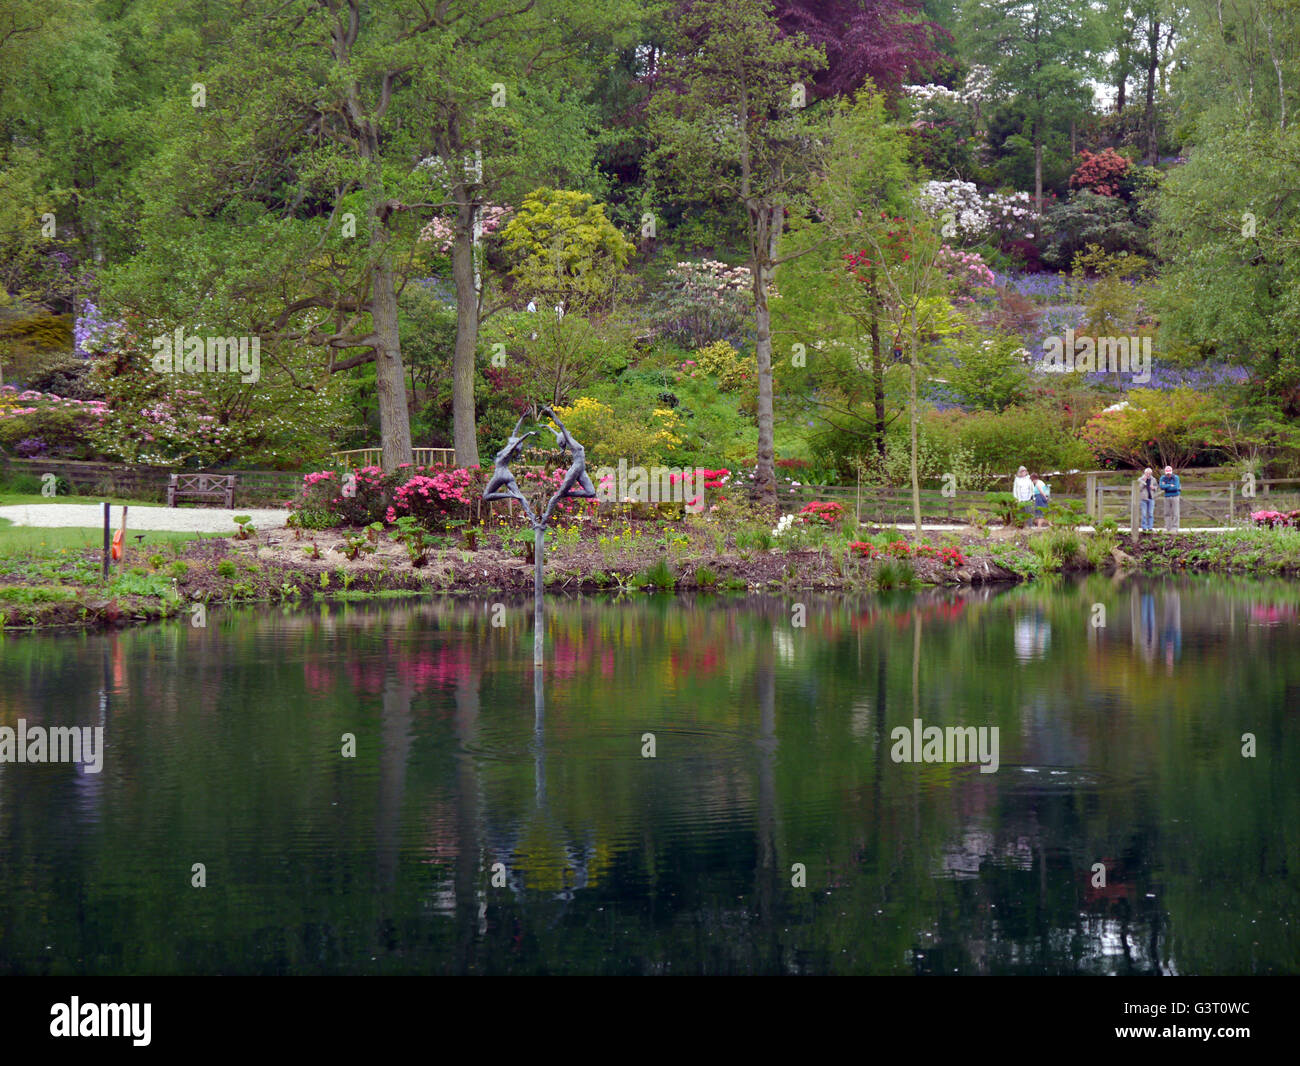 Reflections in one of the Lakes at the Himalayan Garden & Sculpture Park, North Yorkshire, England UK. Stock Photo